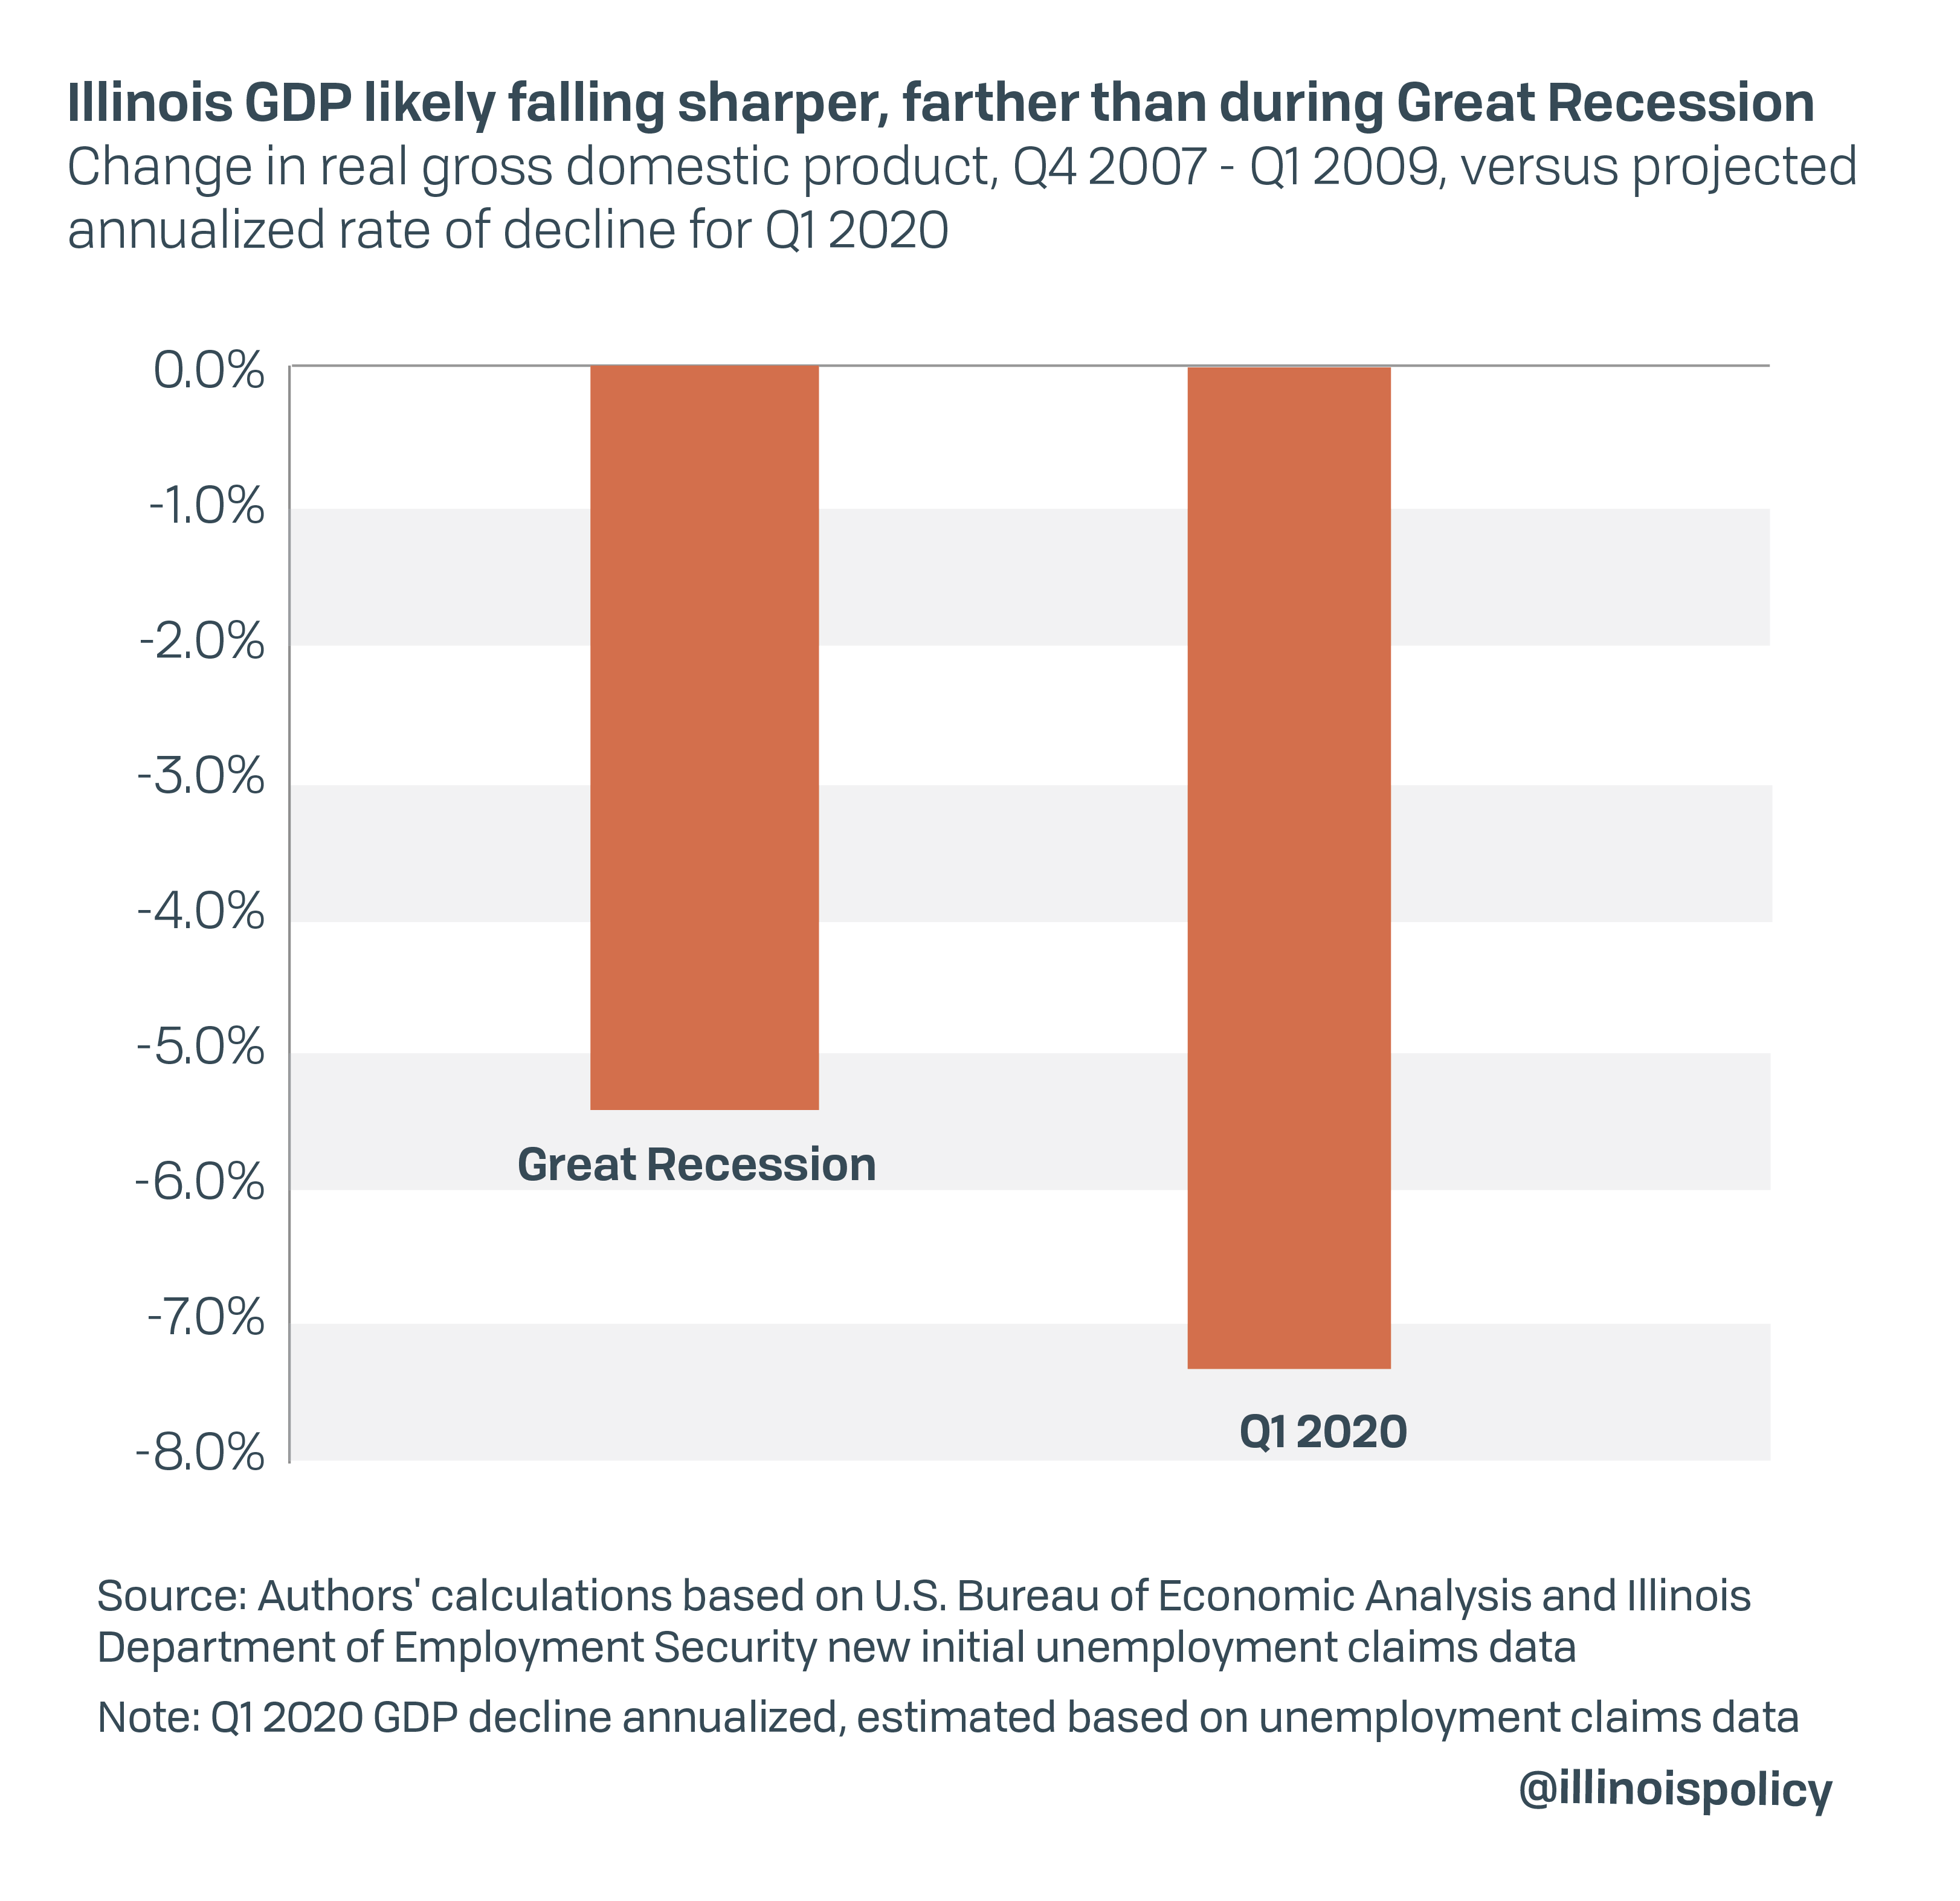 Illinois GDP falling farther, sharper than during Great Recession